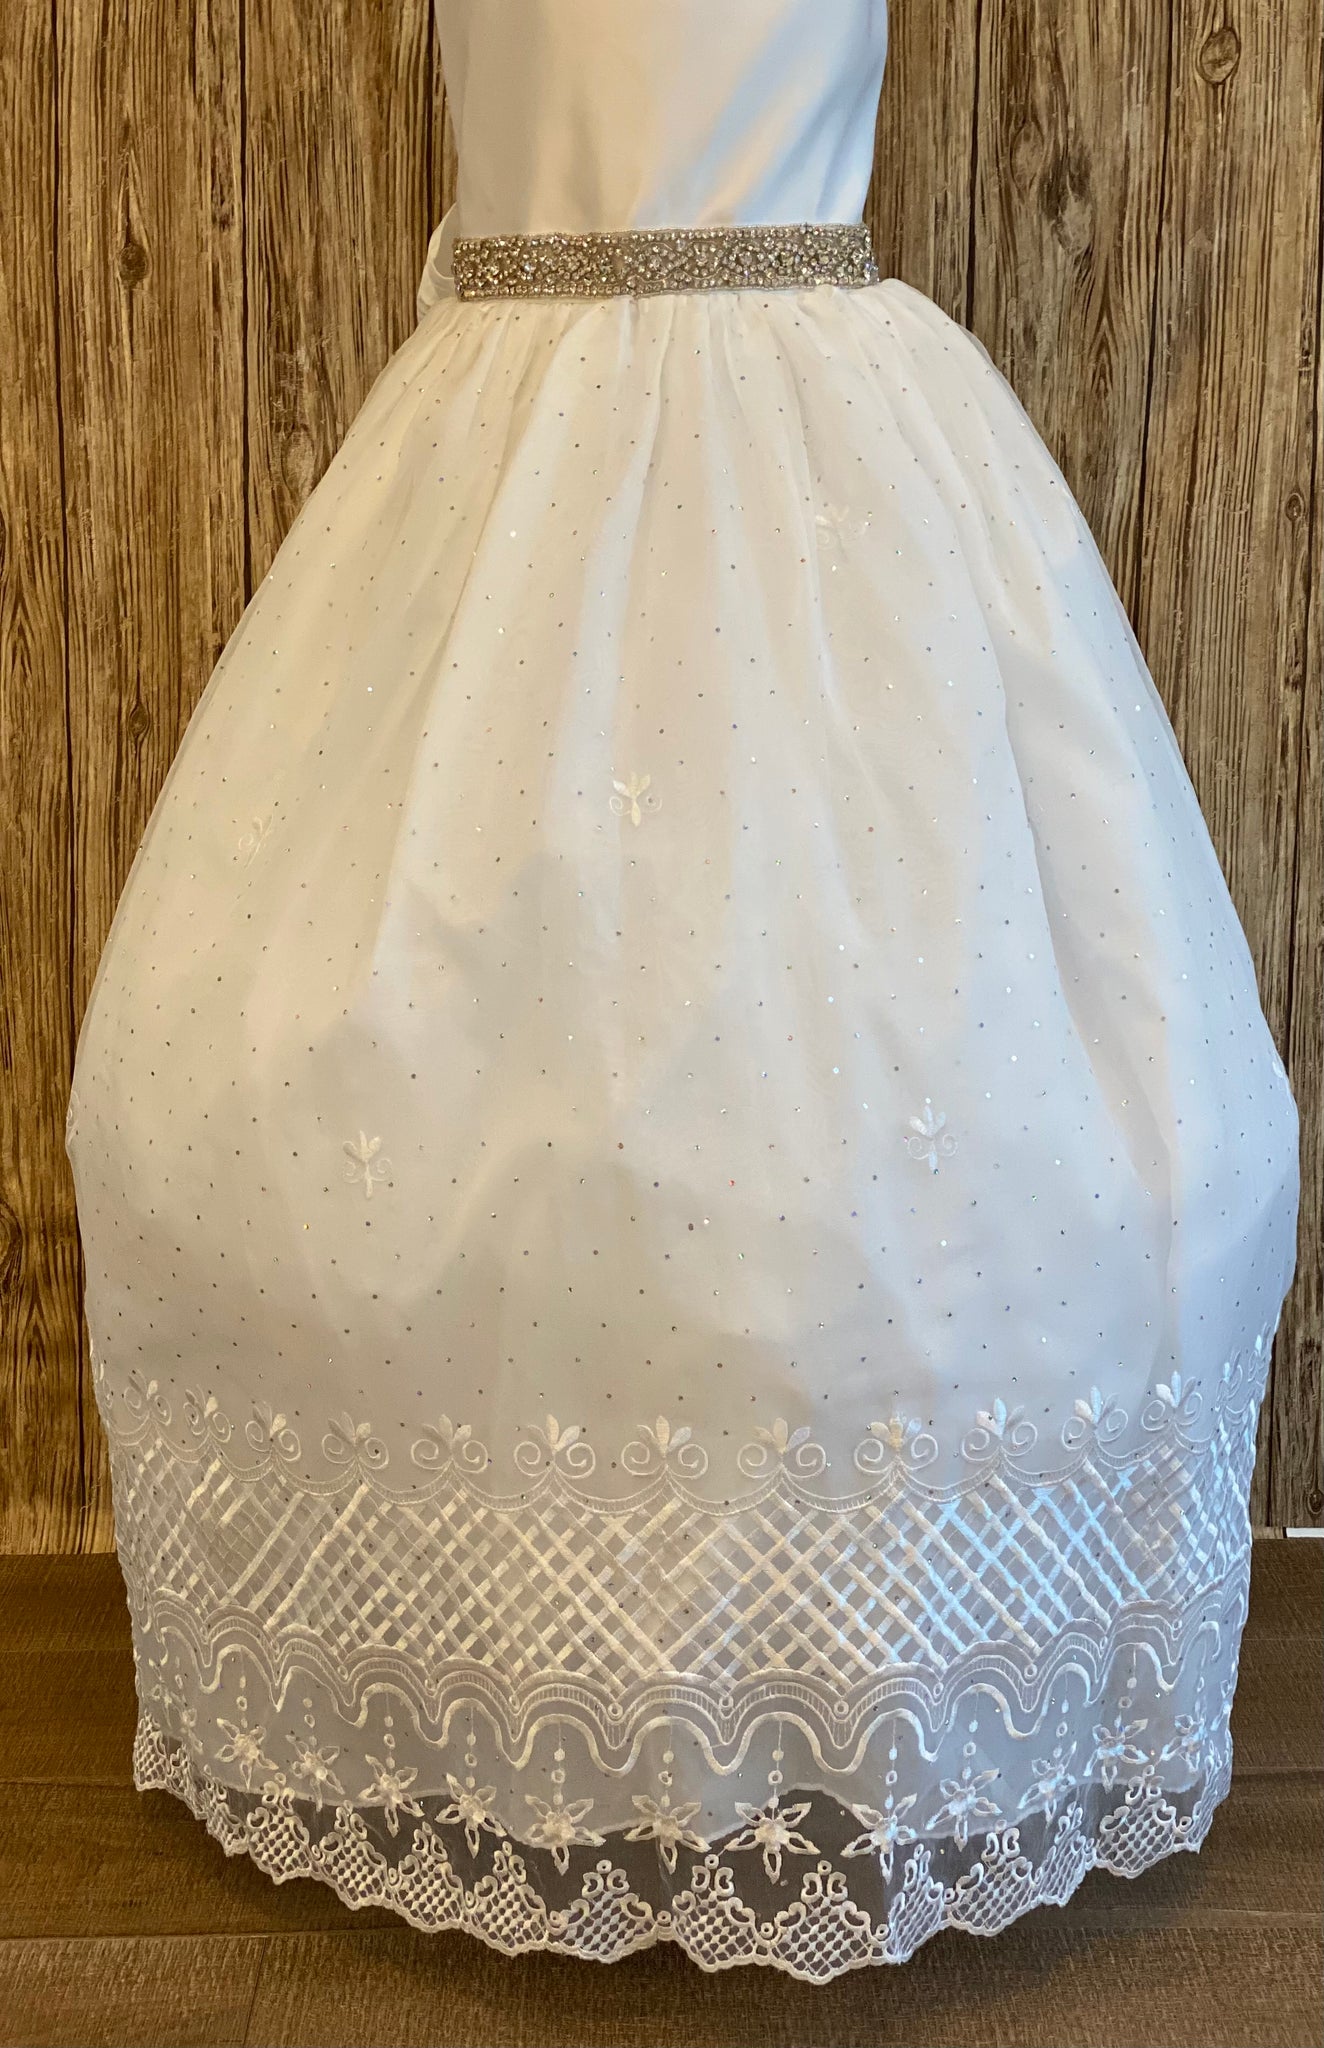 White, size 12 Scoop neck satin bodice Rhinestone belt Tulle skirt with jeweled detailing Embroidered lace trim among skirt edge Pearl buttoned closure Satin ribbon for big bow